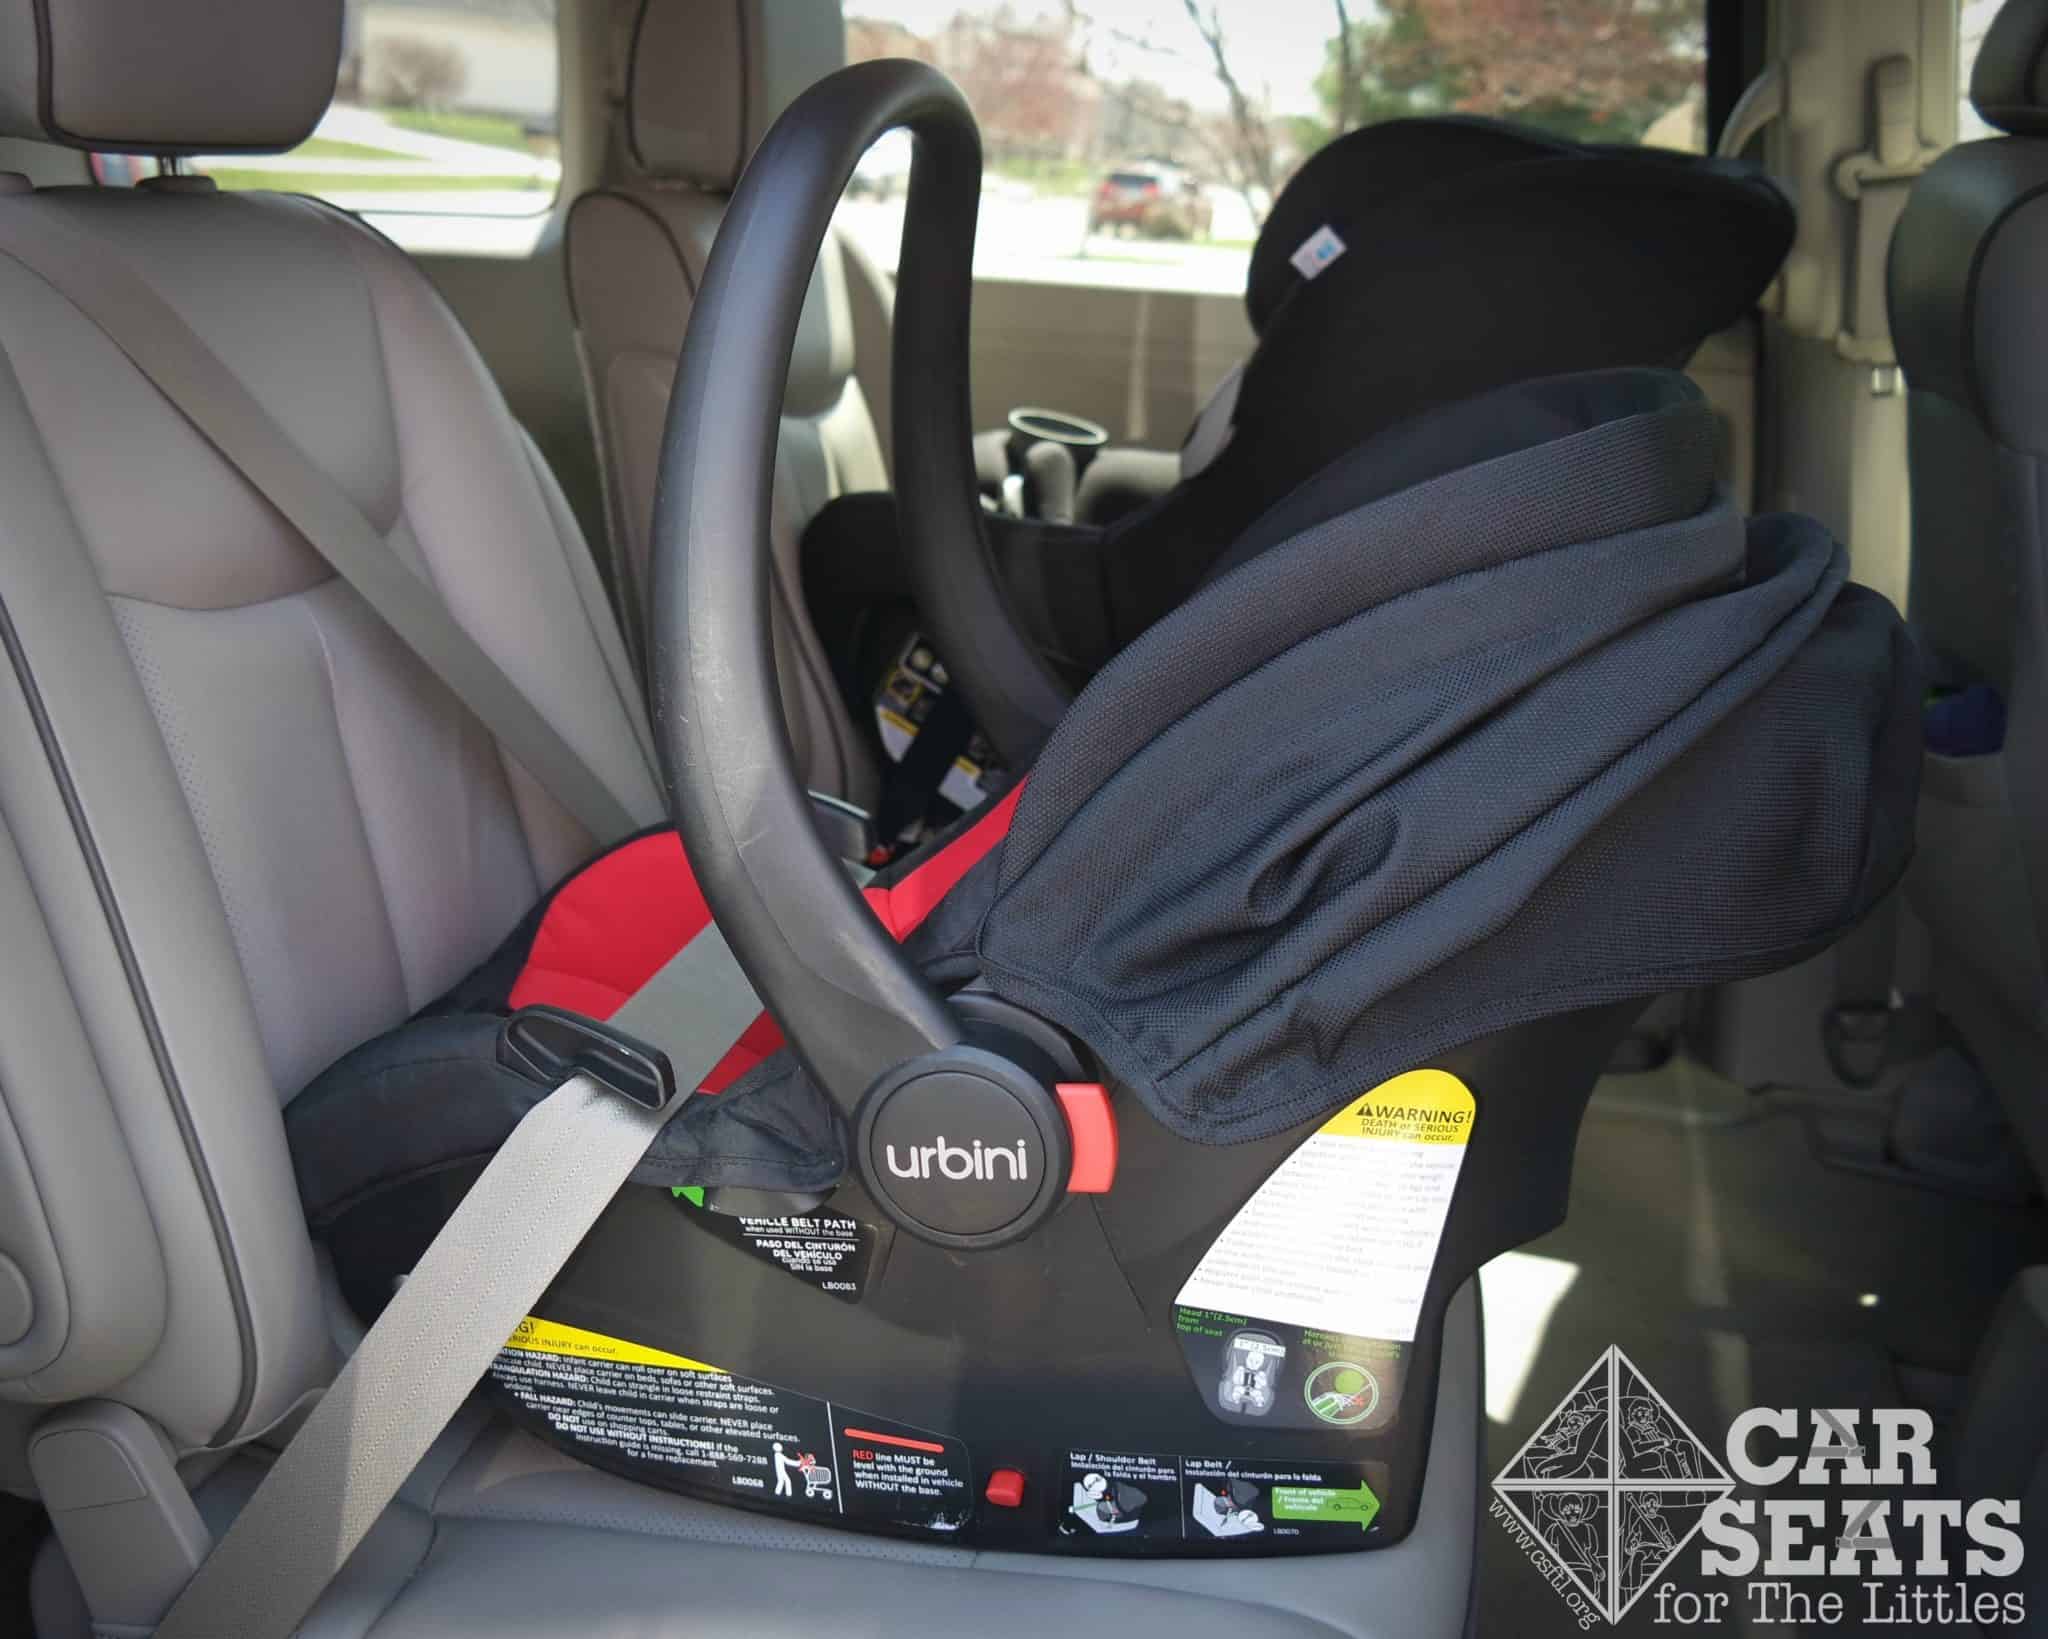 Rear Facing Only Seat Without The Base, How To Install Child Seat With Seatbelt